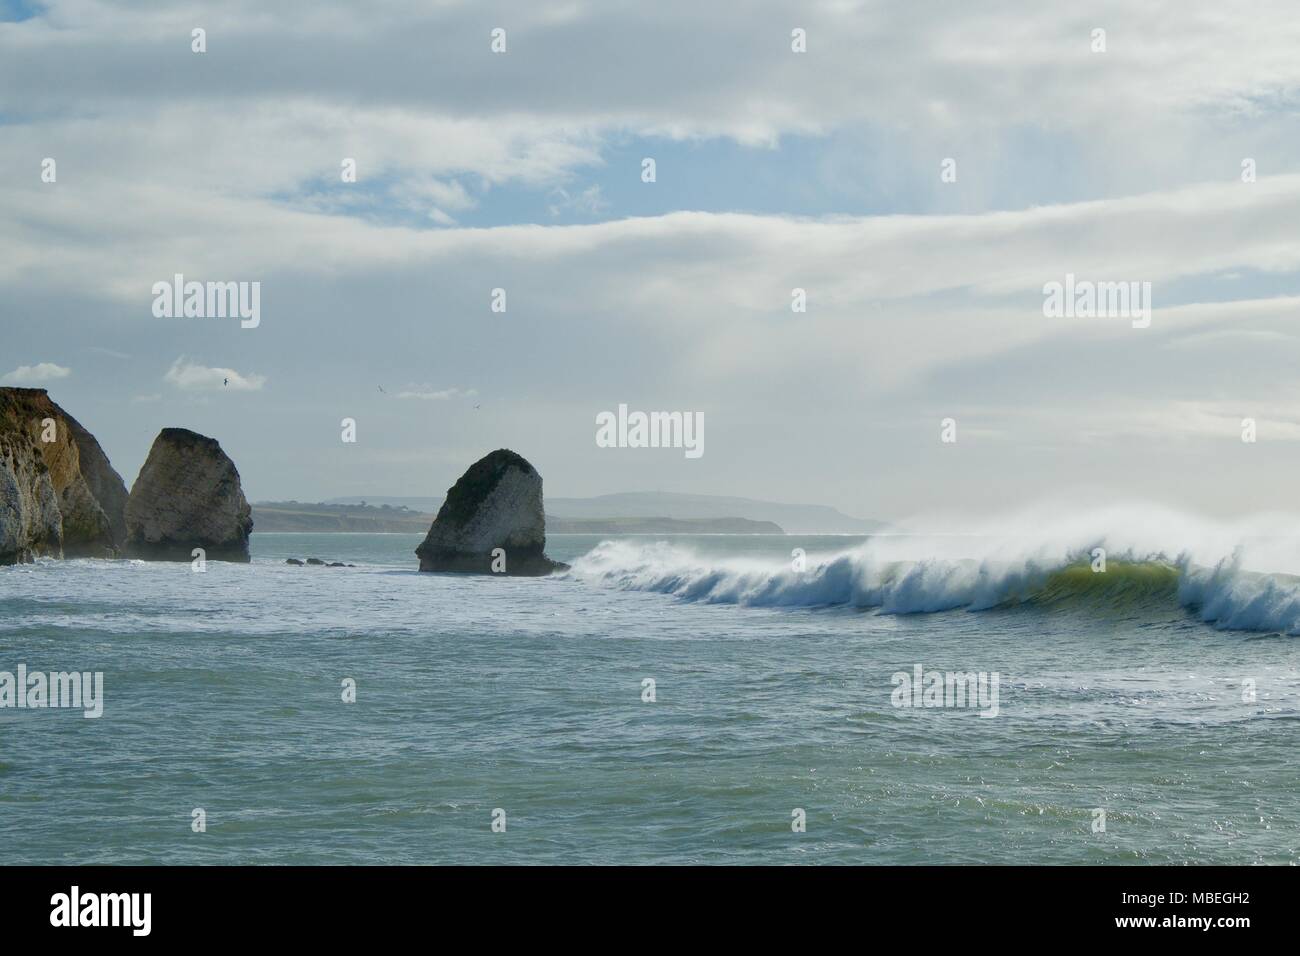 Surf is up at Freshwater Bay, Isle of Wight with large wave Stock Photo